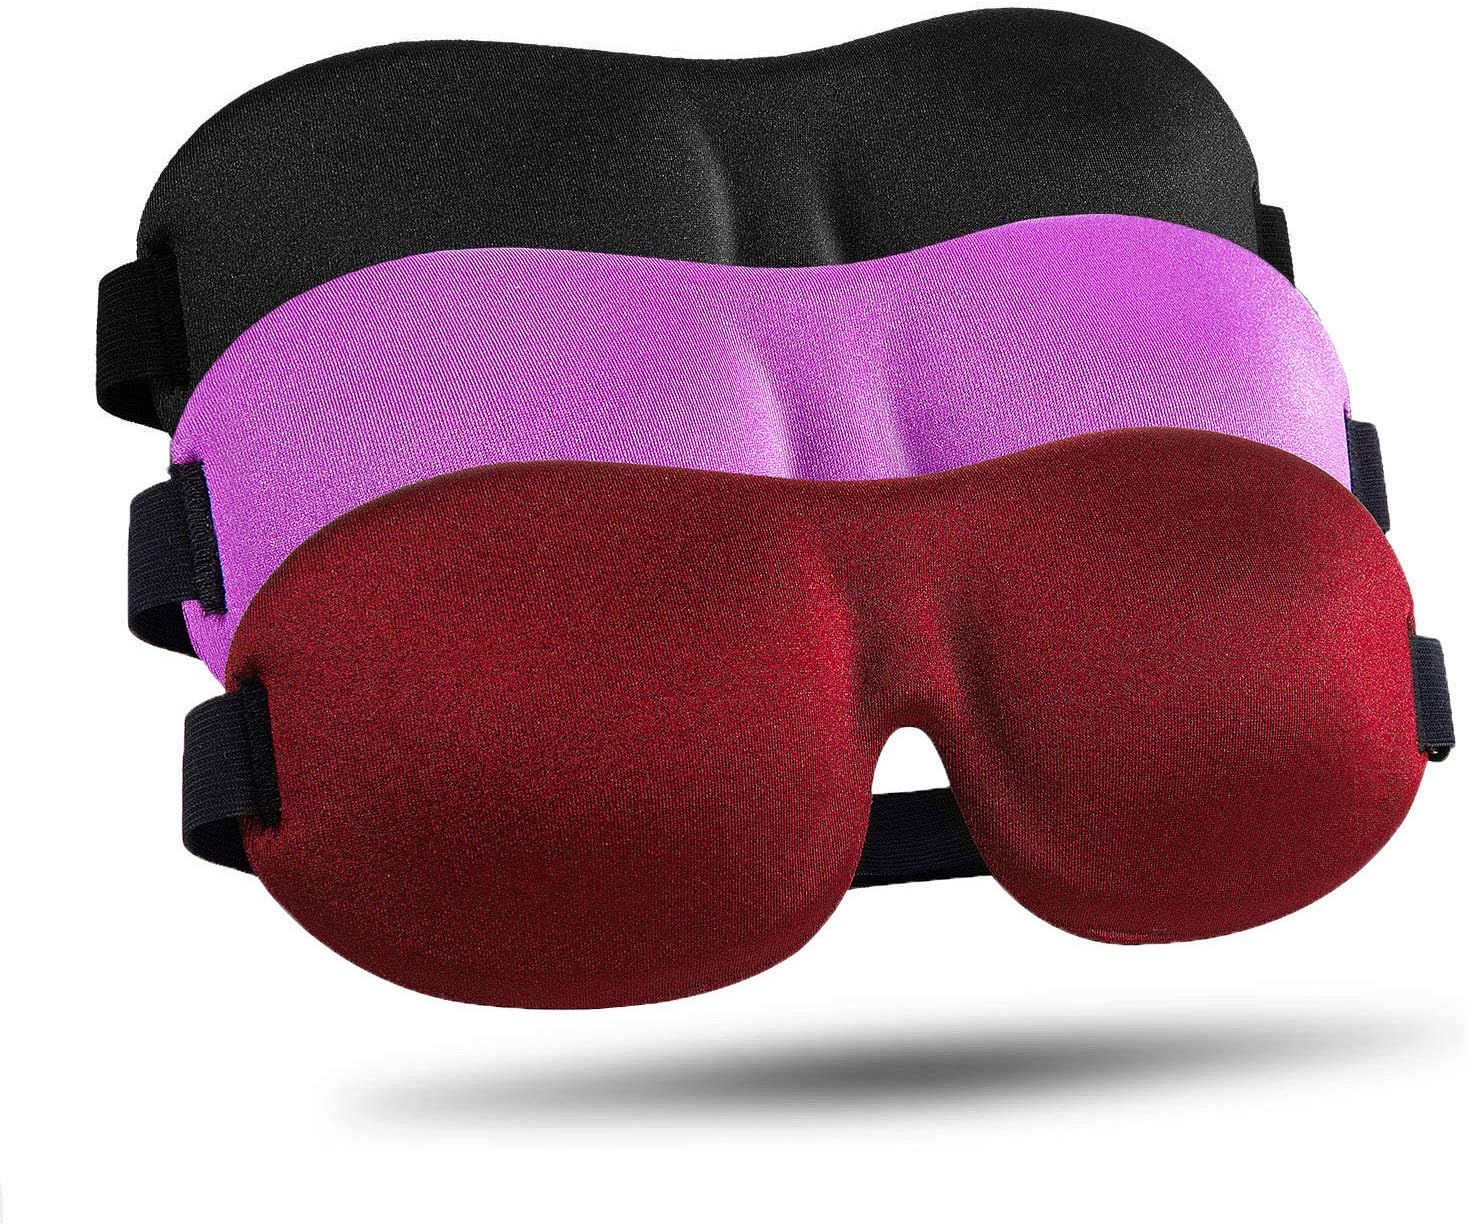 Super soft and fully adjustable - these eye masks are the best I have ever worn. I just purchased a second set (I sometimes lose them when I travel). They block out all light and stay in place. I wear them on airplanes when I travel and anytime I need to sleep in a room that isn't dark enough. They are incredibly well made - I've used them for years. Highly recommend.